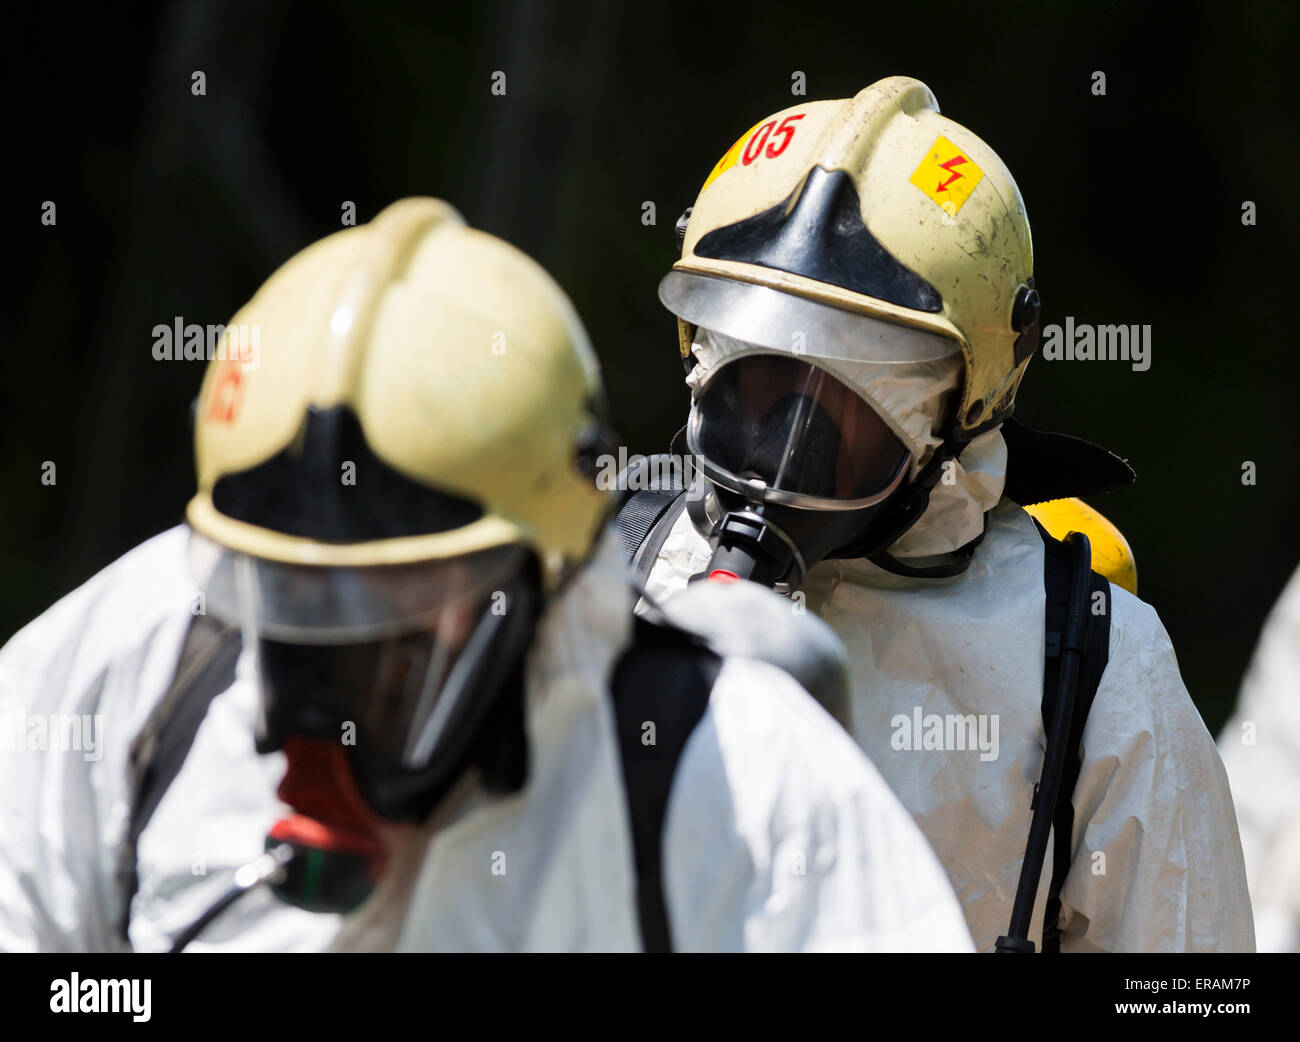 A team working with toxic acids and chemicals is approaching a chemical cargo train crash near Sofia, Bulgaria. Teams from Fire  Stock Photo